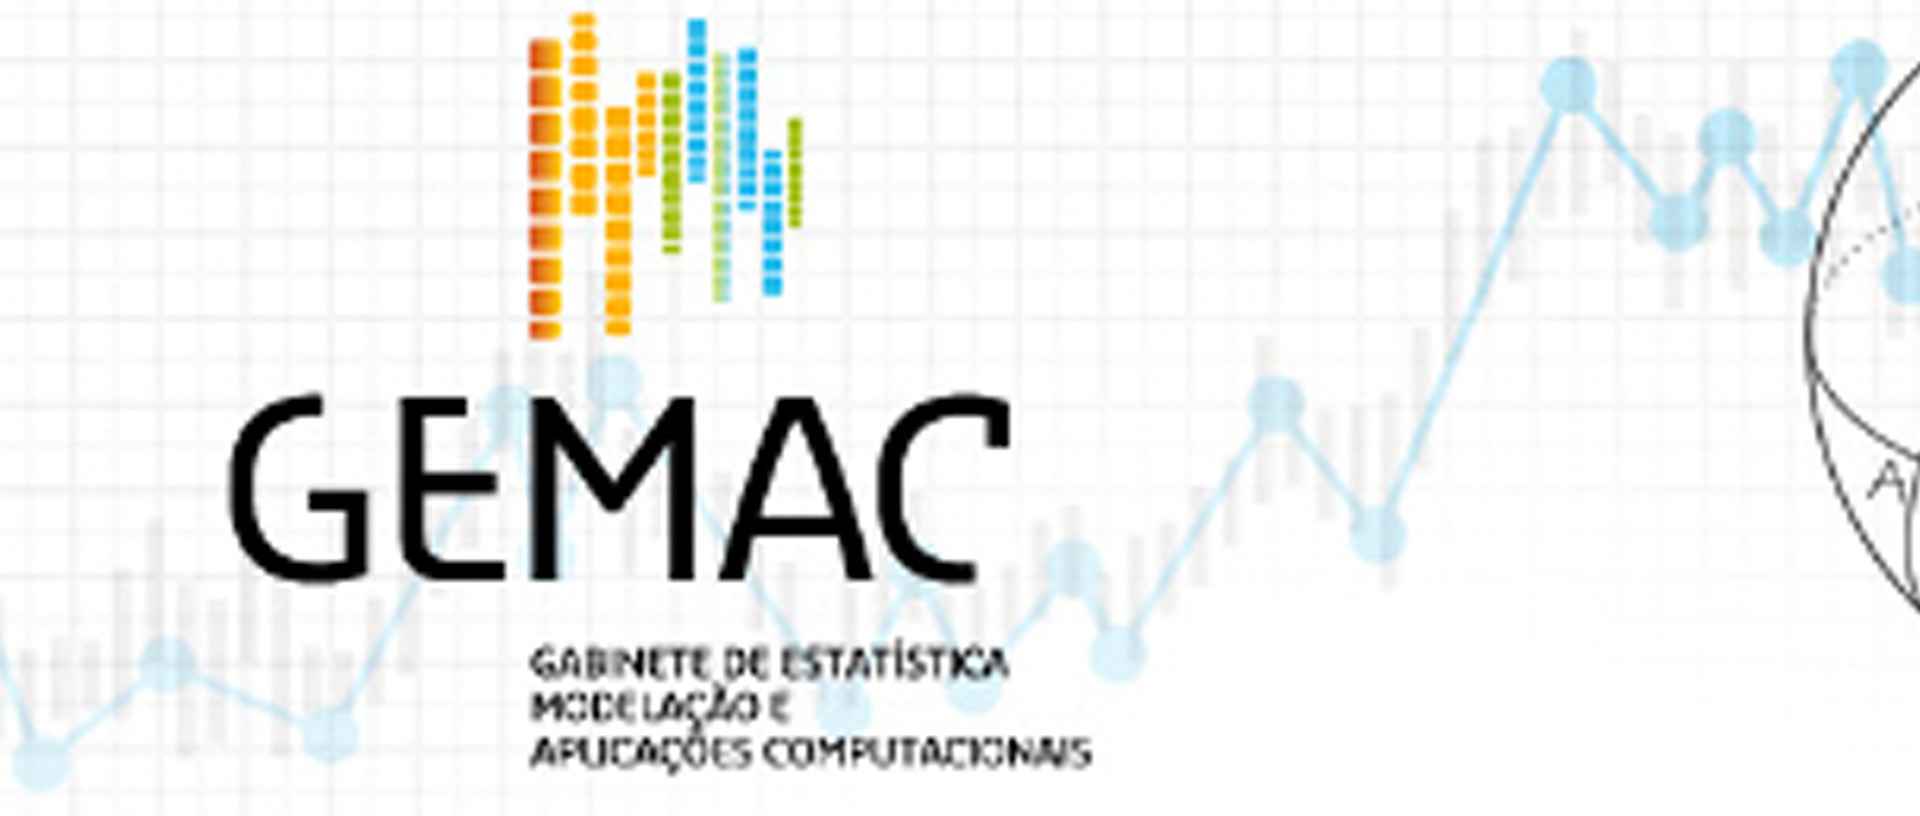 Alumni of the Faculty of Sciences of the University of Porto

Logo of GEMAC - Statistics, Modeling and Computational Applications Office